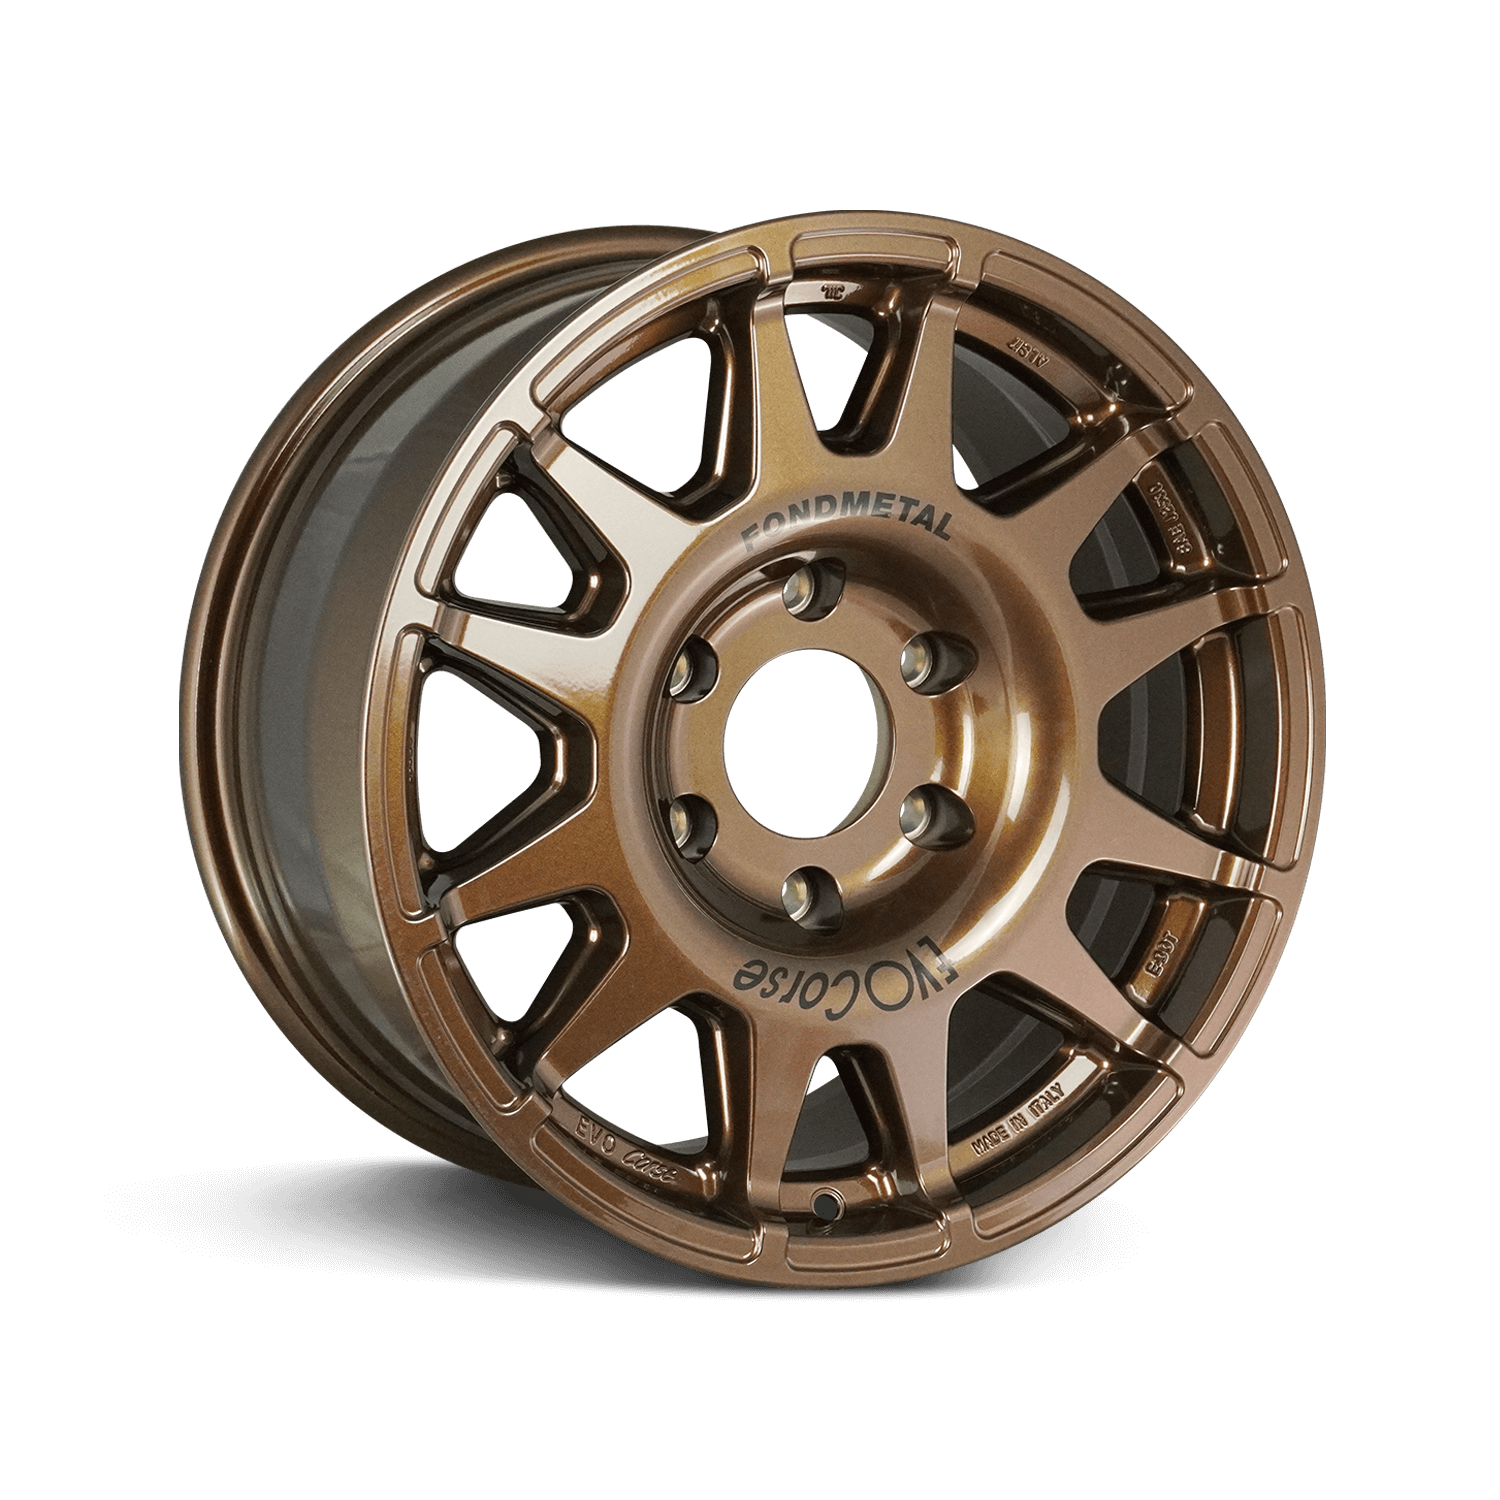 clossy bronze evo corse dakar zero and super zero on toyota 70 series, 76 Wagon, 78 Troopy and 79 Dual Cab, strongest 4wd and 4x4 touring and overlanding off-road alloy wheel rims